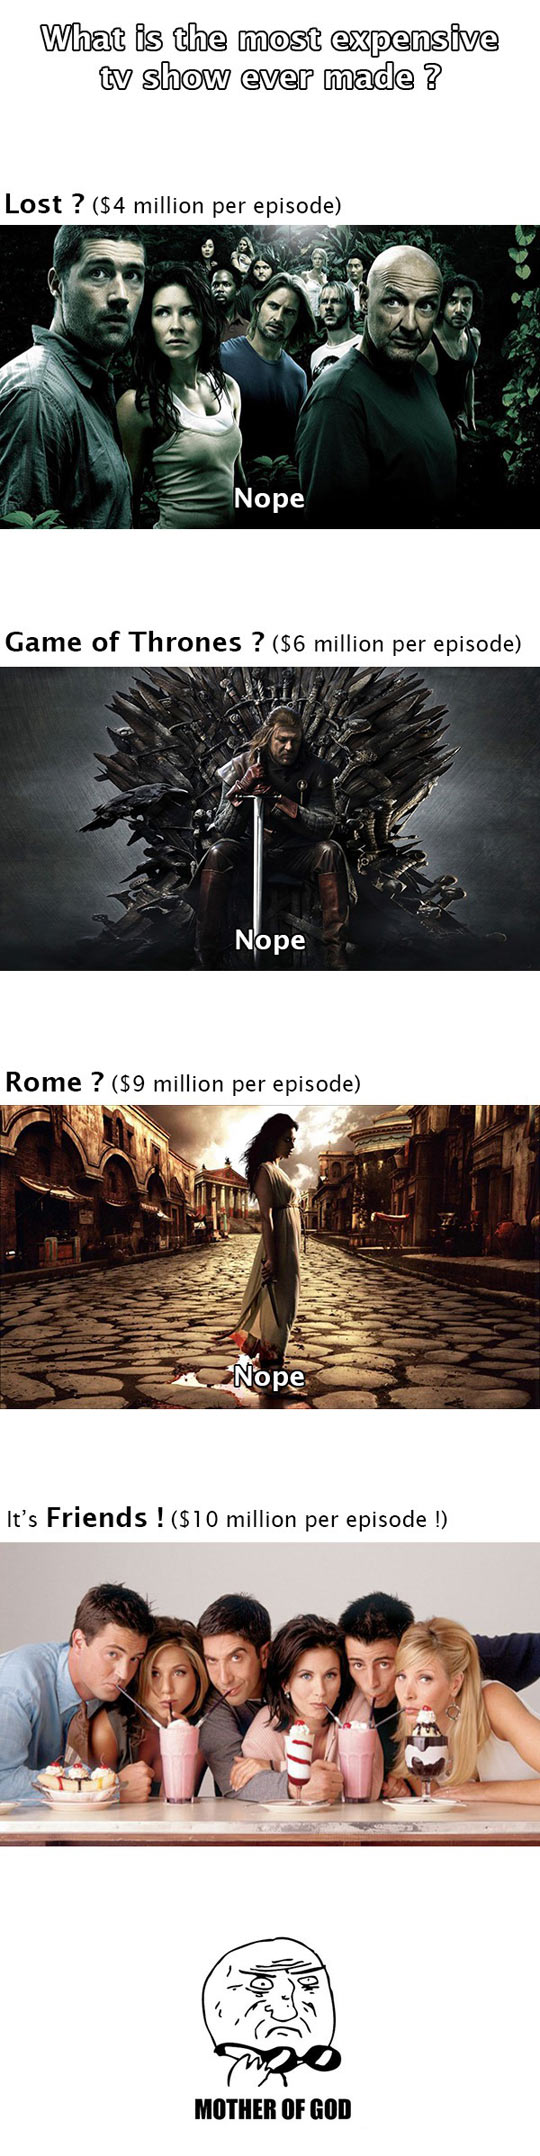 The most expensive TV show in history.